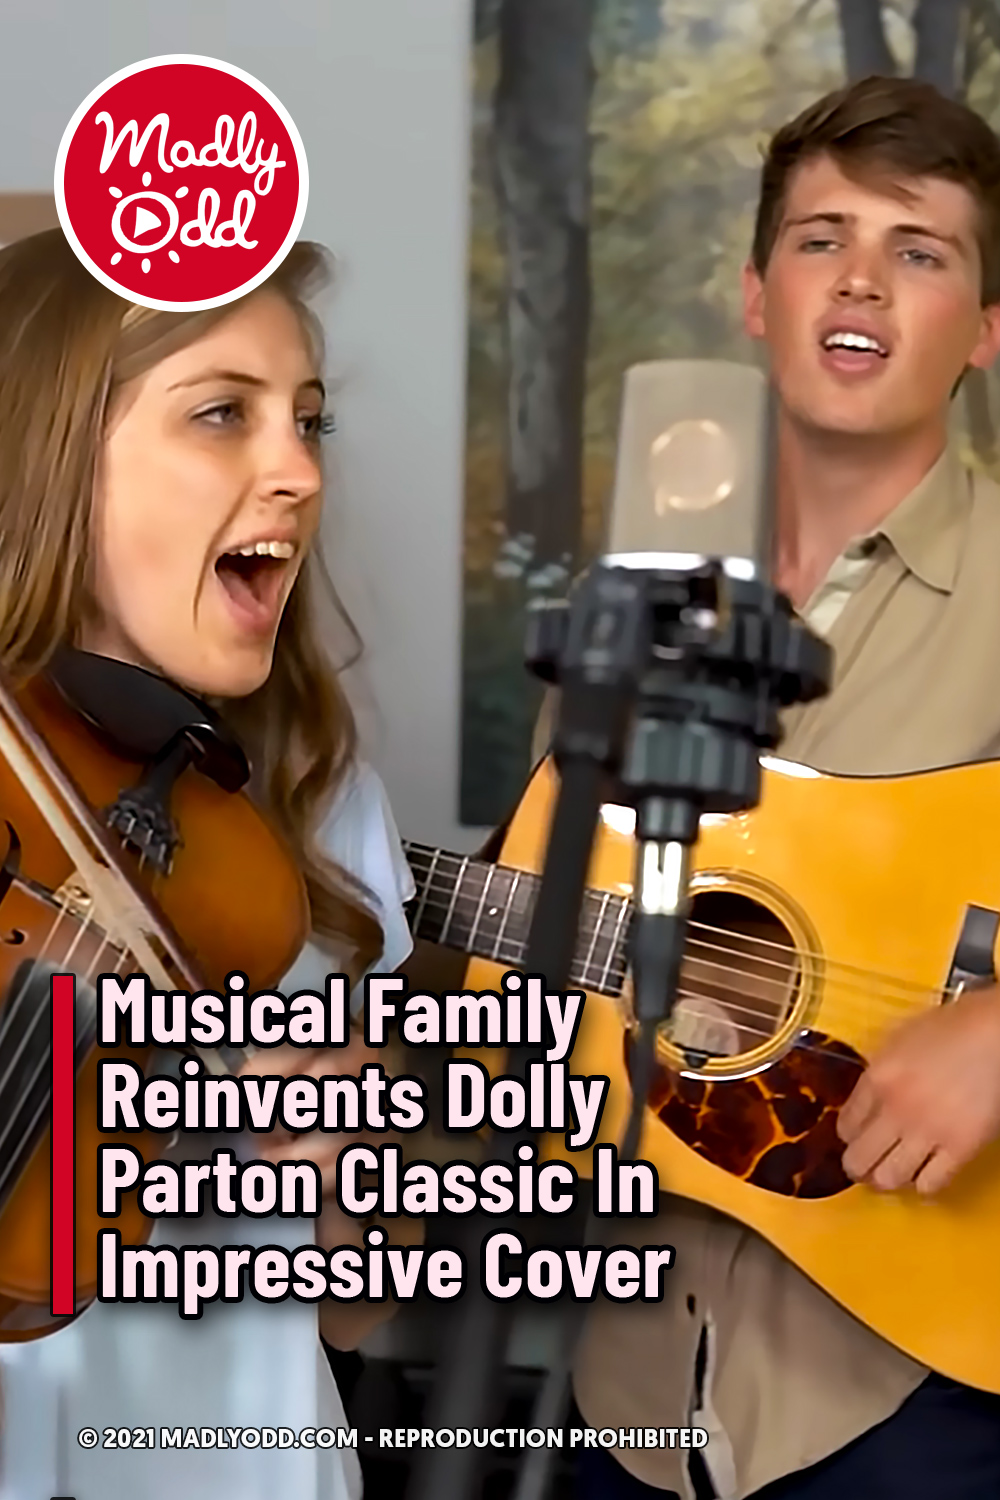 Musical Family Reinvents Dolly Parton Classic In Impressive Cover